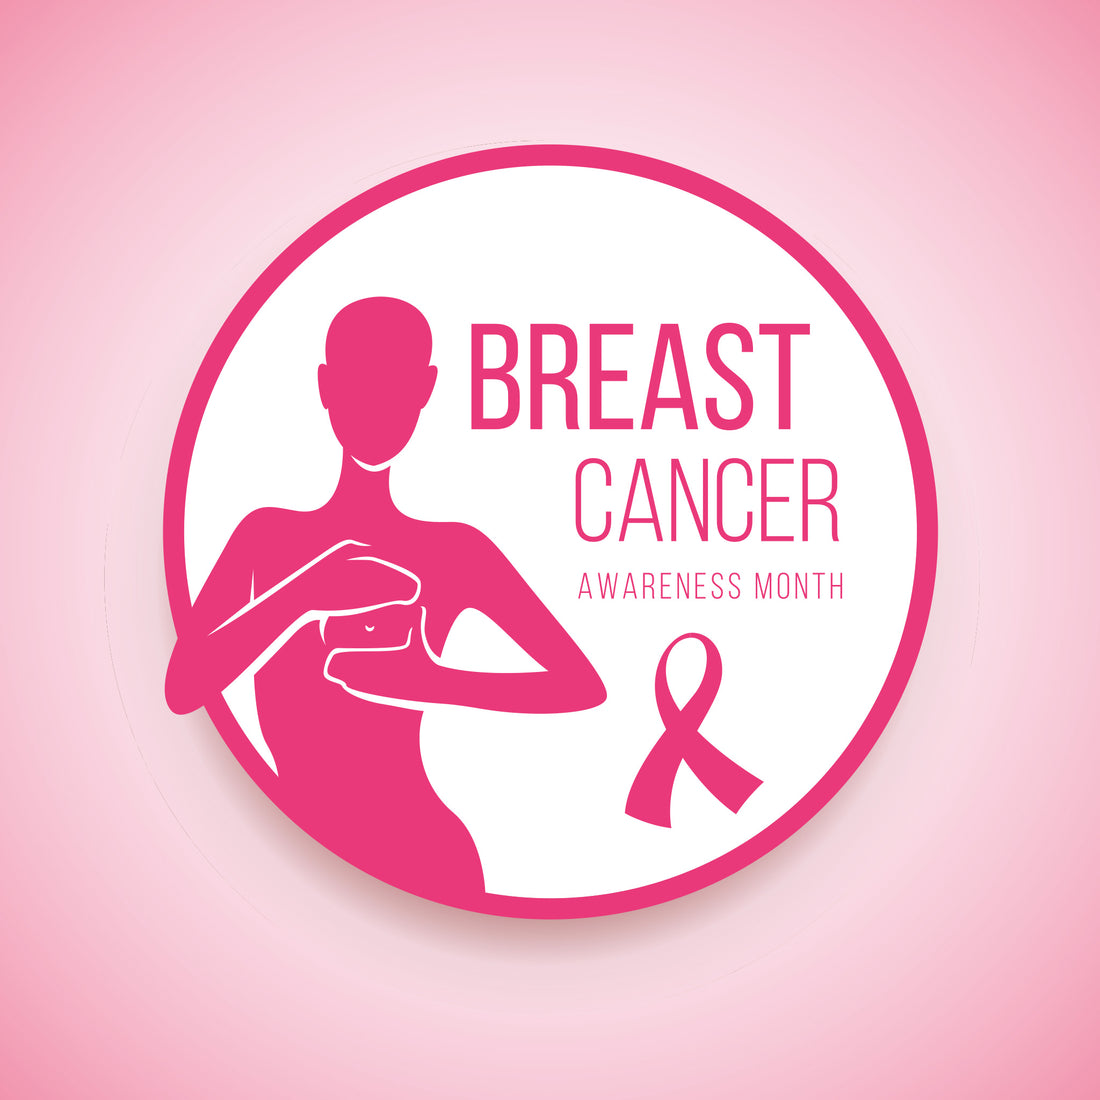 Breast cancer – How to stay aware and steer clear!